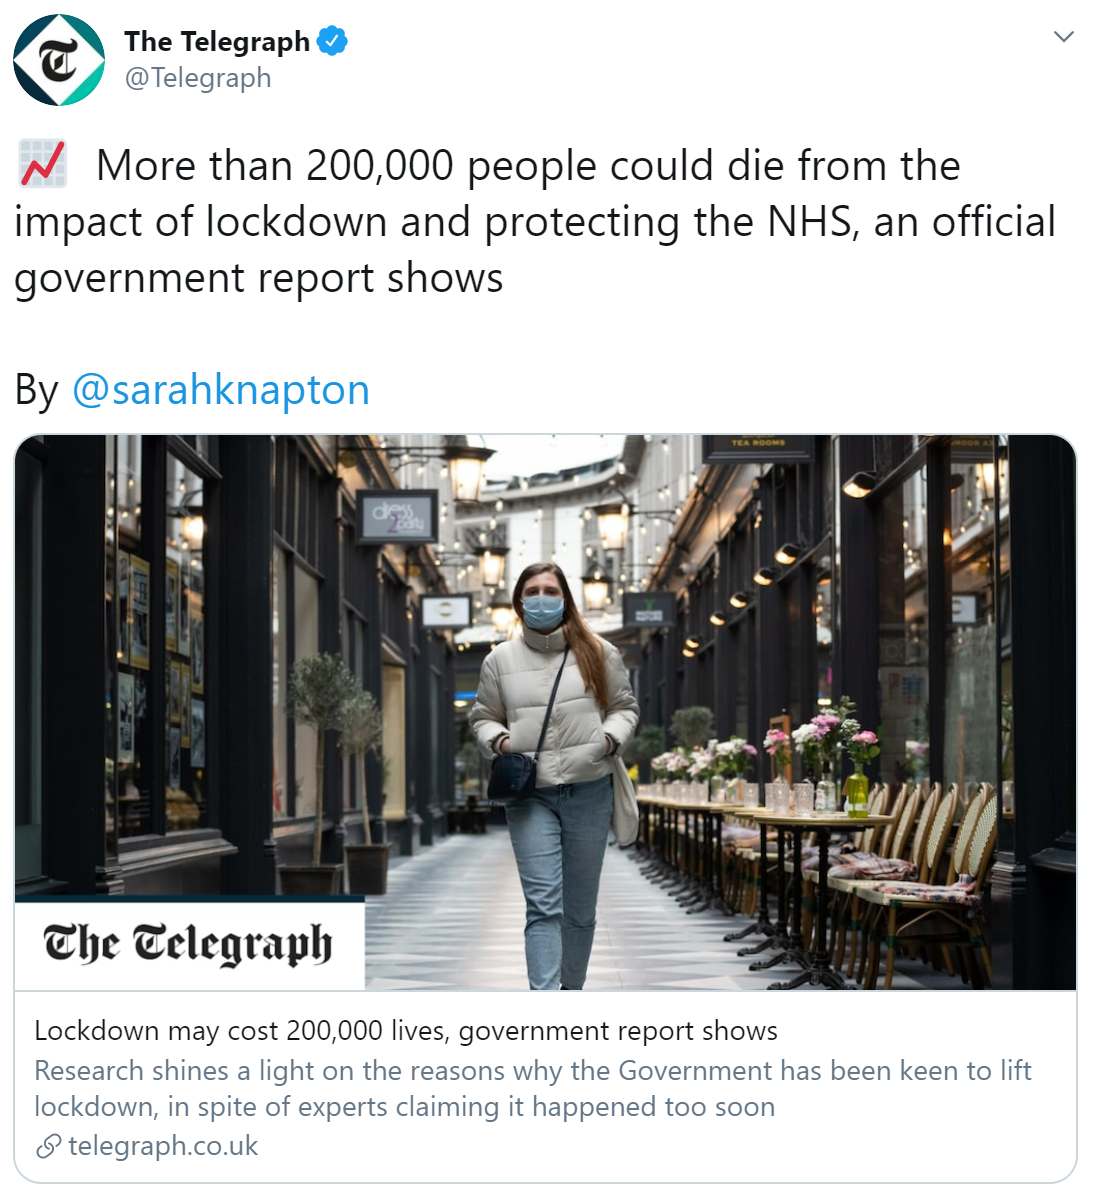 "Lockdown may cost 200,000 lives, government report shows".But below is how the Telegraph summarised it on Twitter. Note the difference: "Lockdown *and* protecting the NHS"